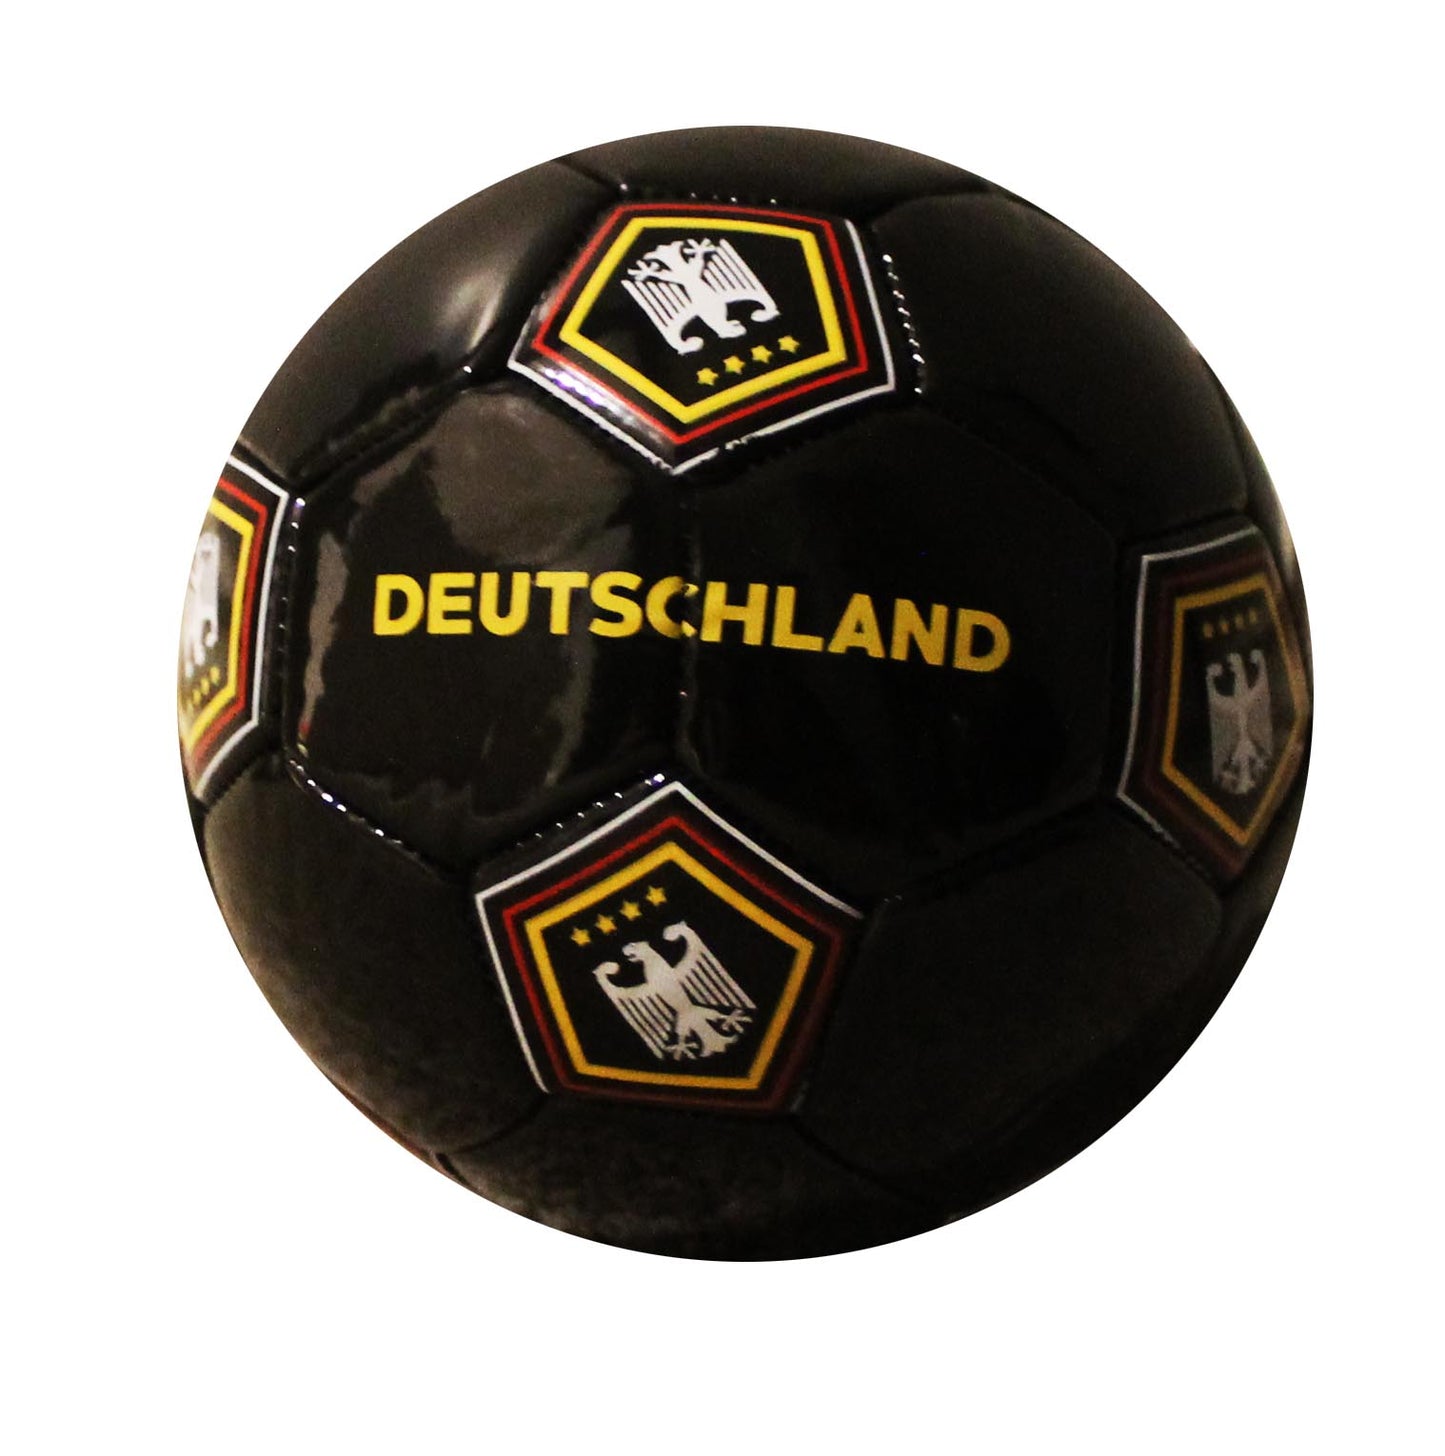 Deutschland Small Size 2 Soccer Ball Germany